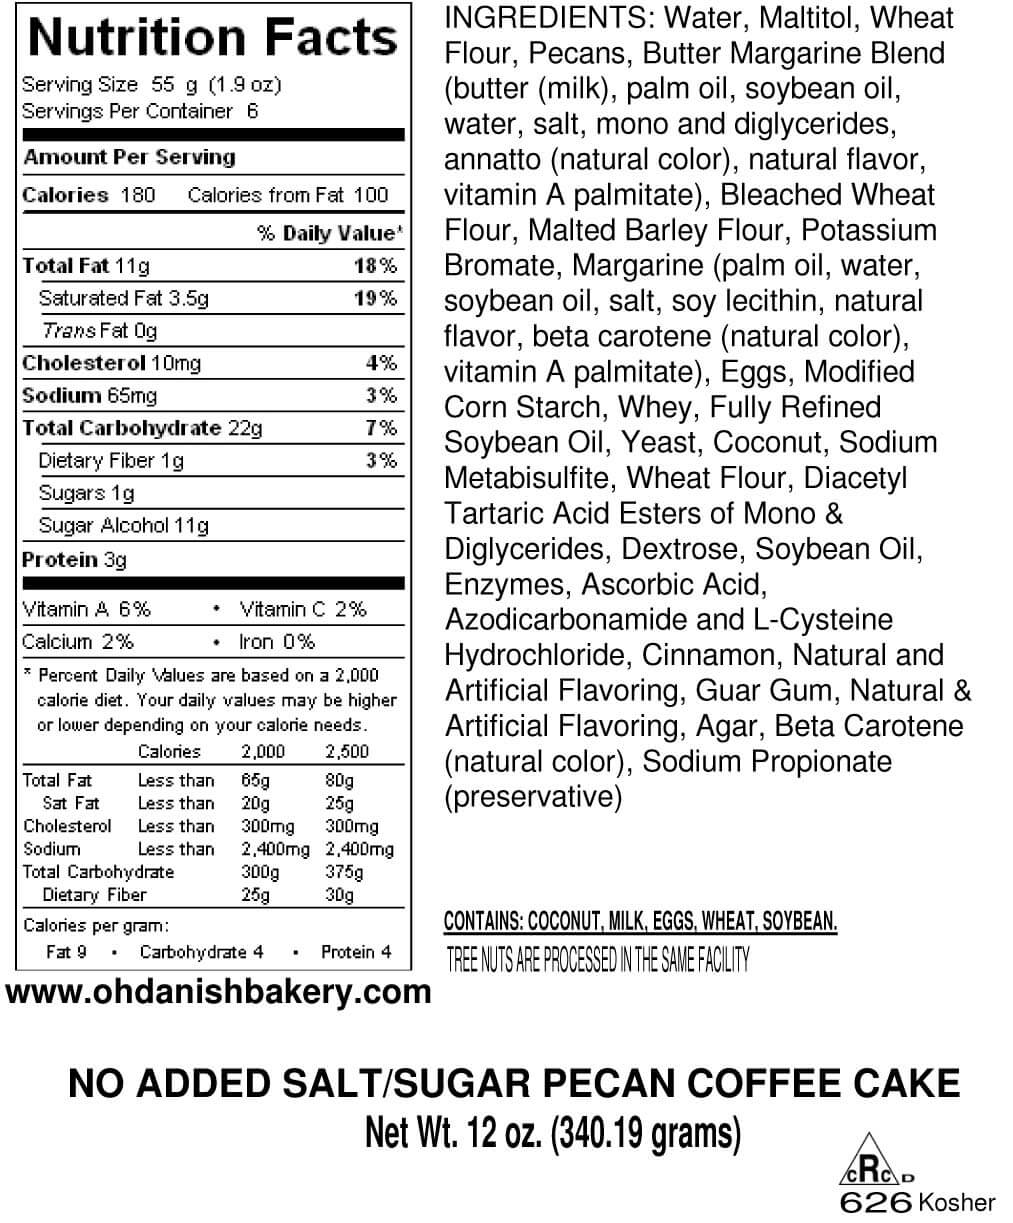 Nutritional Label for No Added Salt and Sugar Coffee Cakes